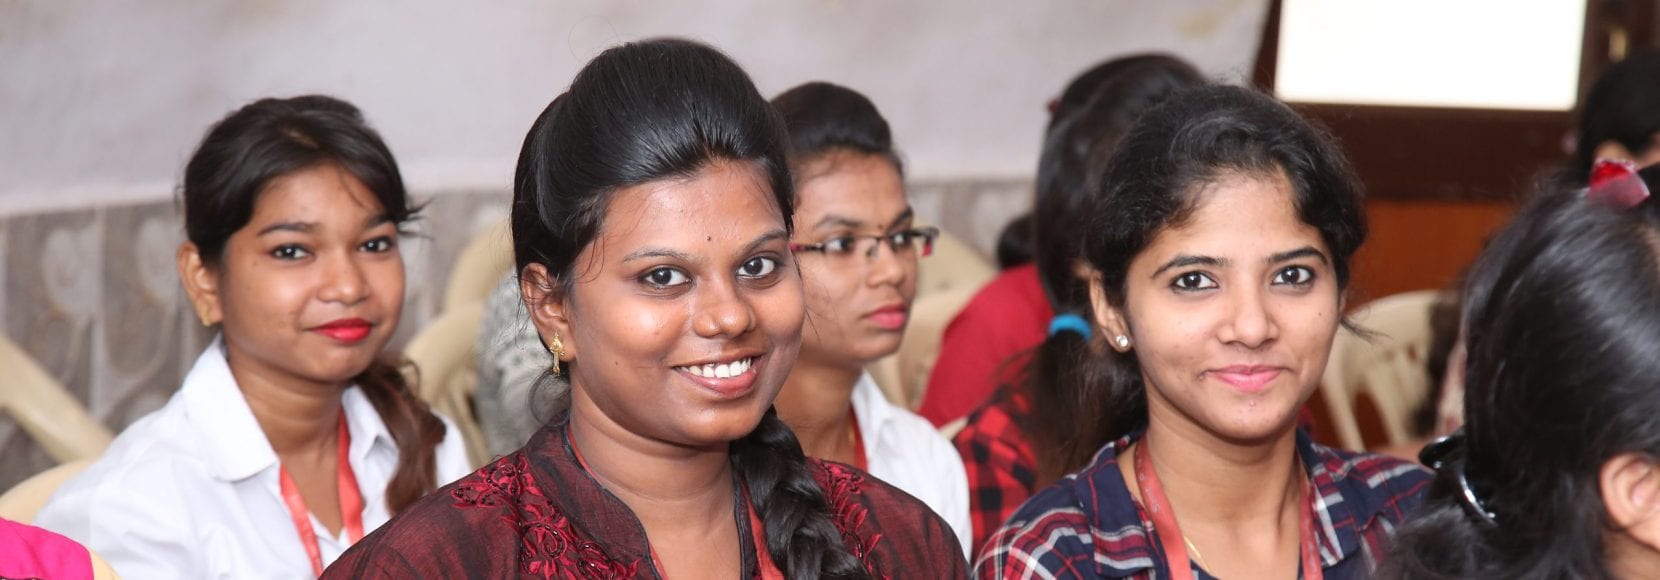 Smiling women at conference in India